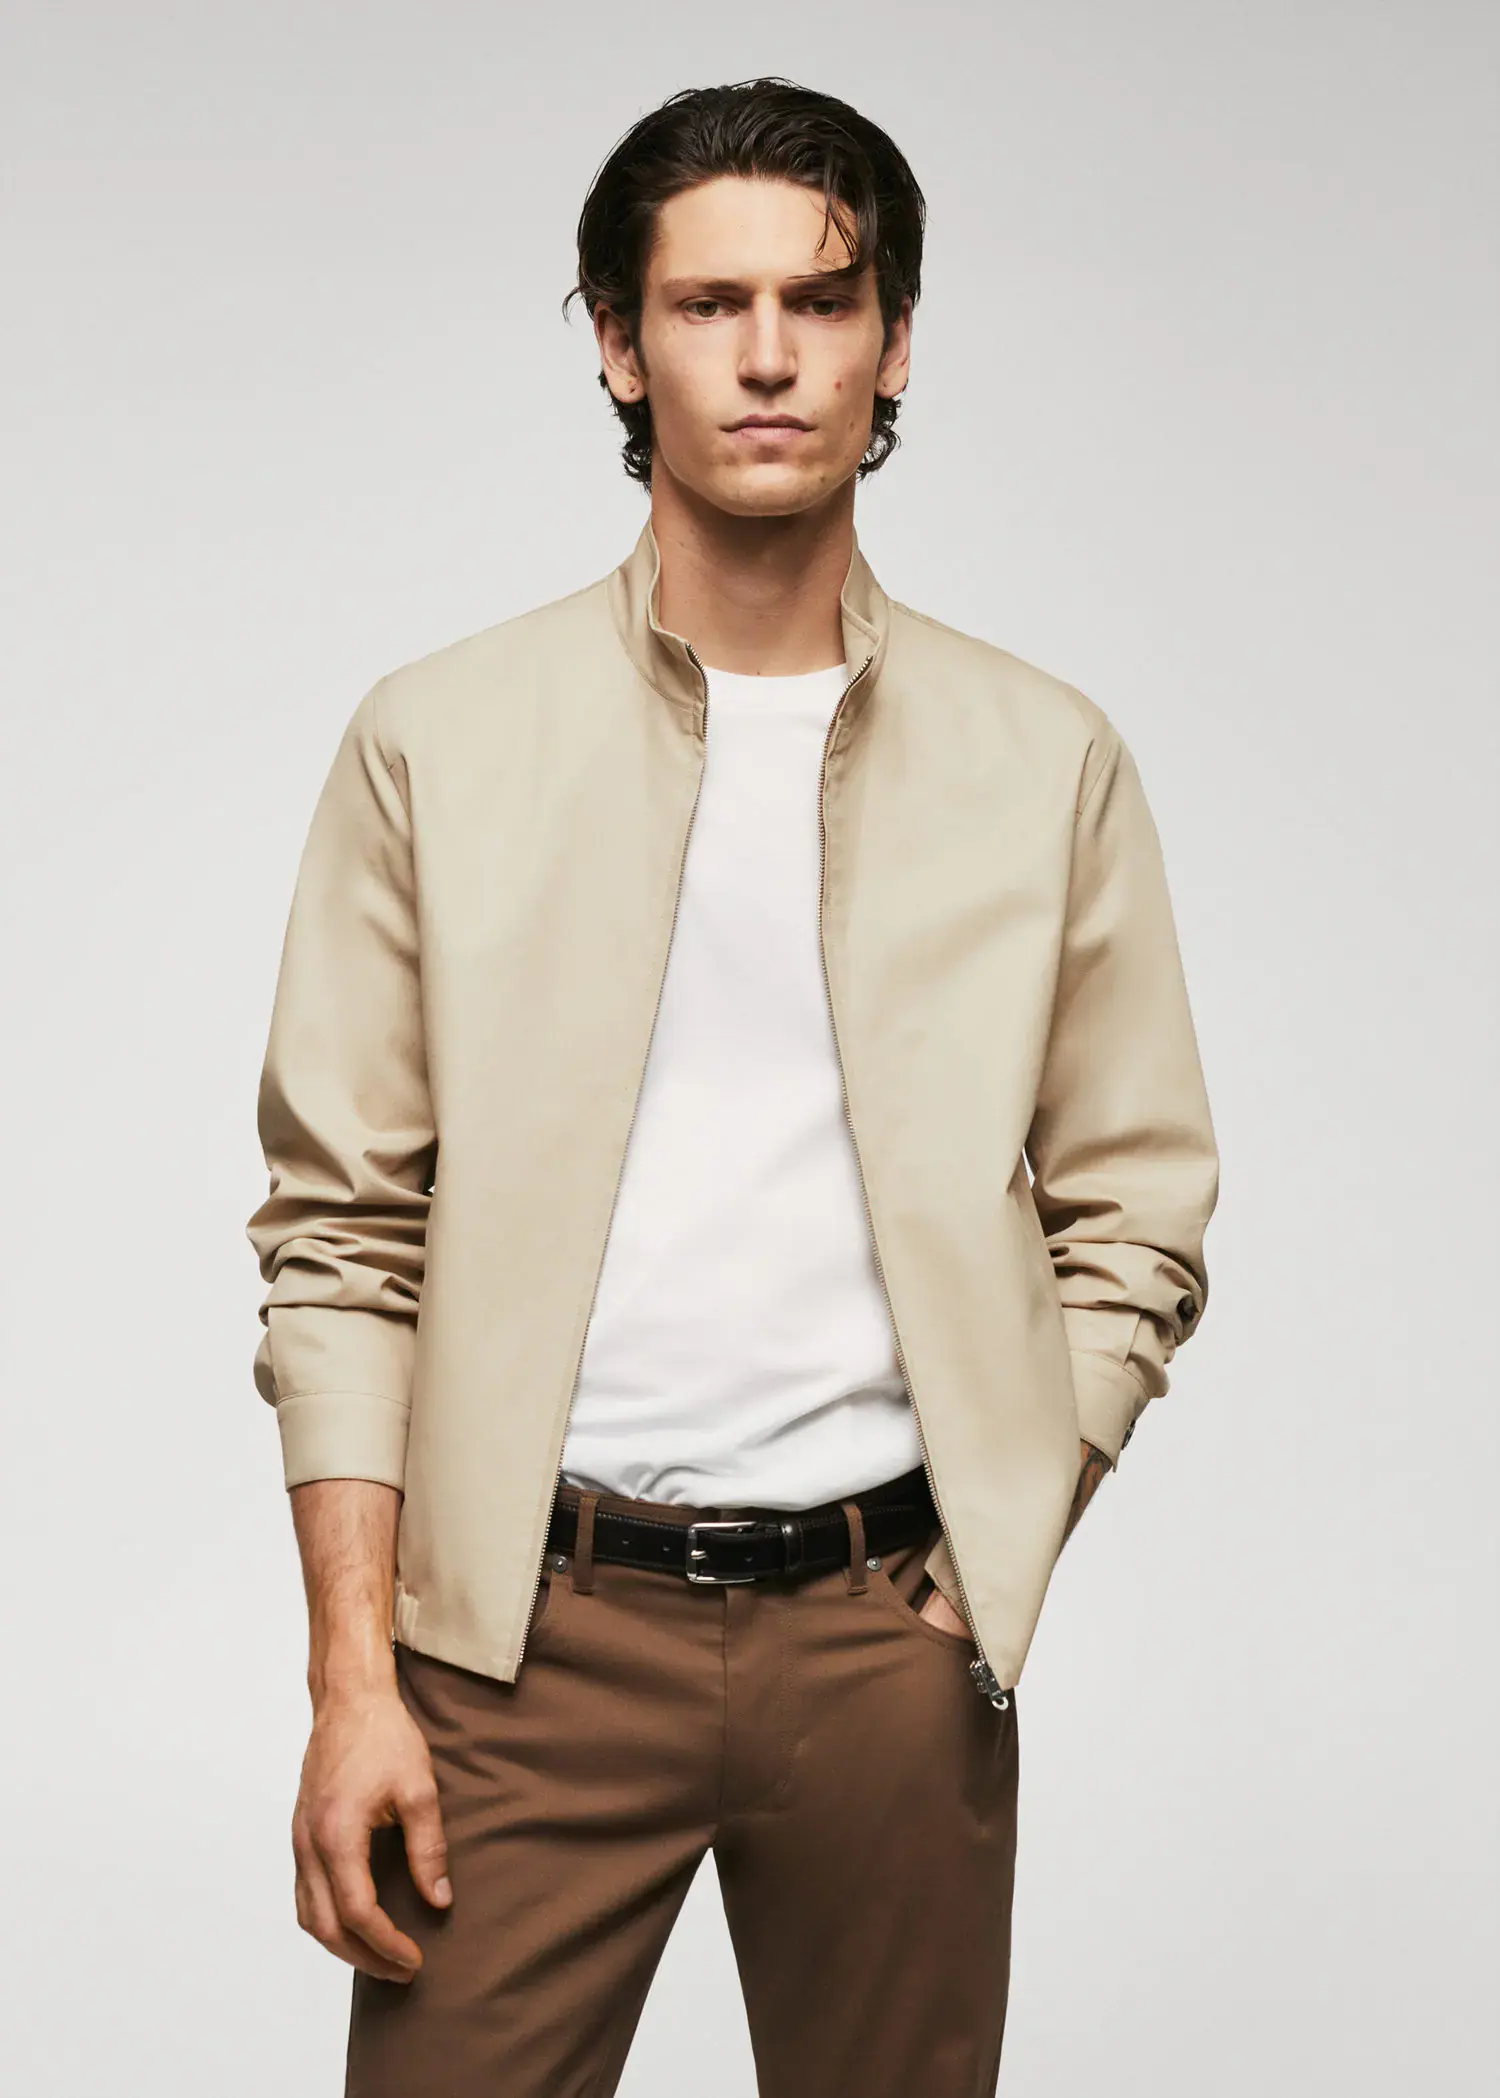 Mango 100% cotton bomber jacket. a man in a tan jacket and brown pants. 